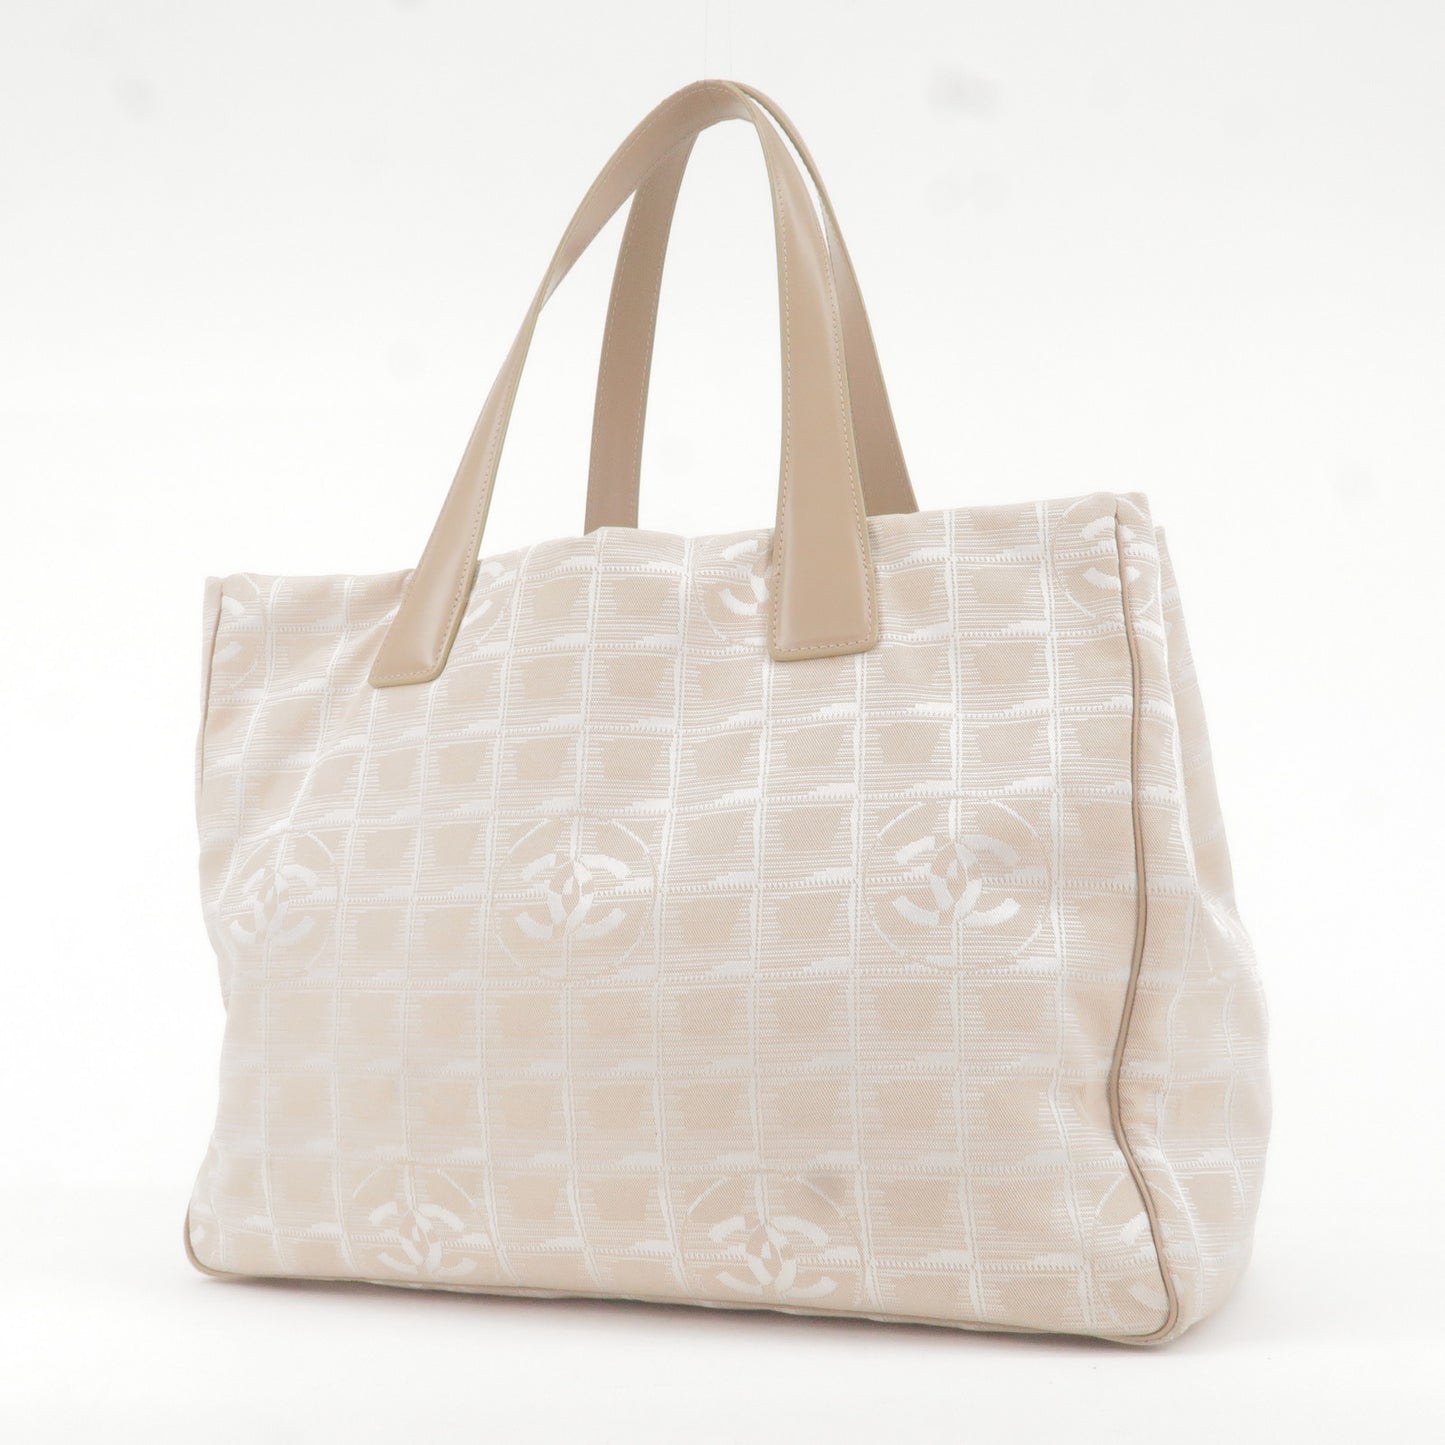 CHANEL Travel Line Nylon Jacquard Leather Tote Bag Beige A15991